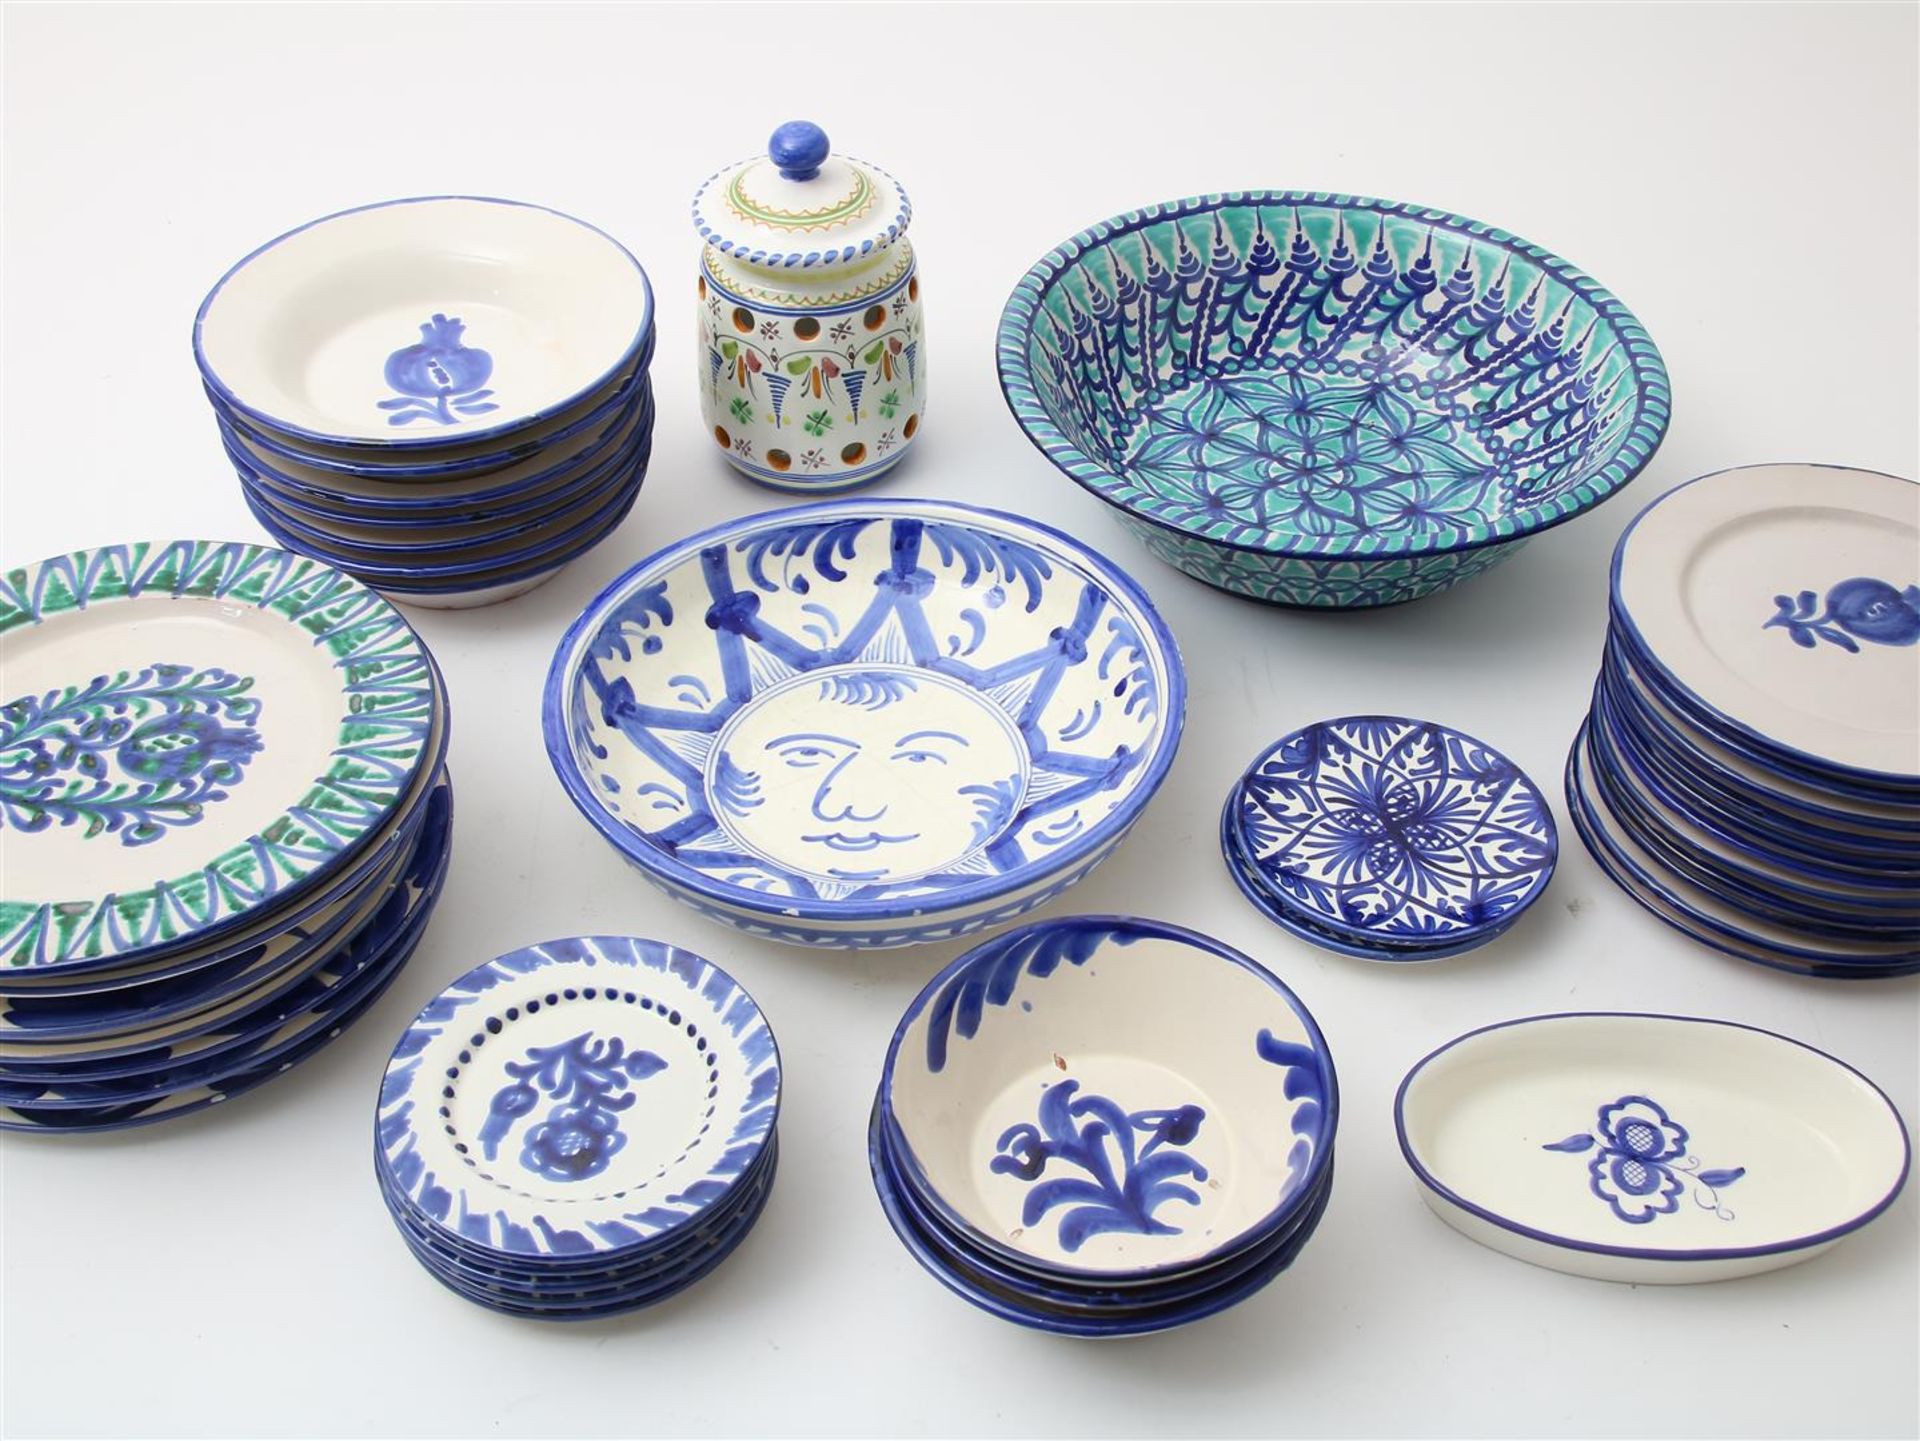 39 pieces of earthenware glazed tableware, largely marked Los Arrayanes Granada, Spain, including